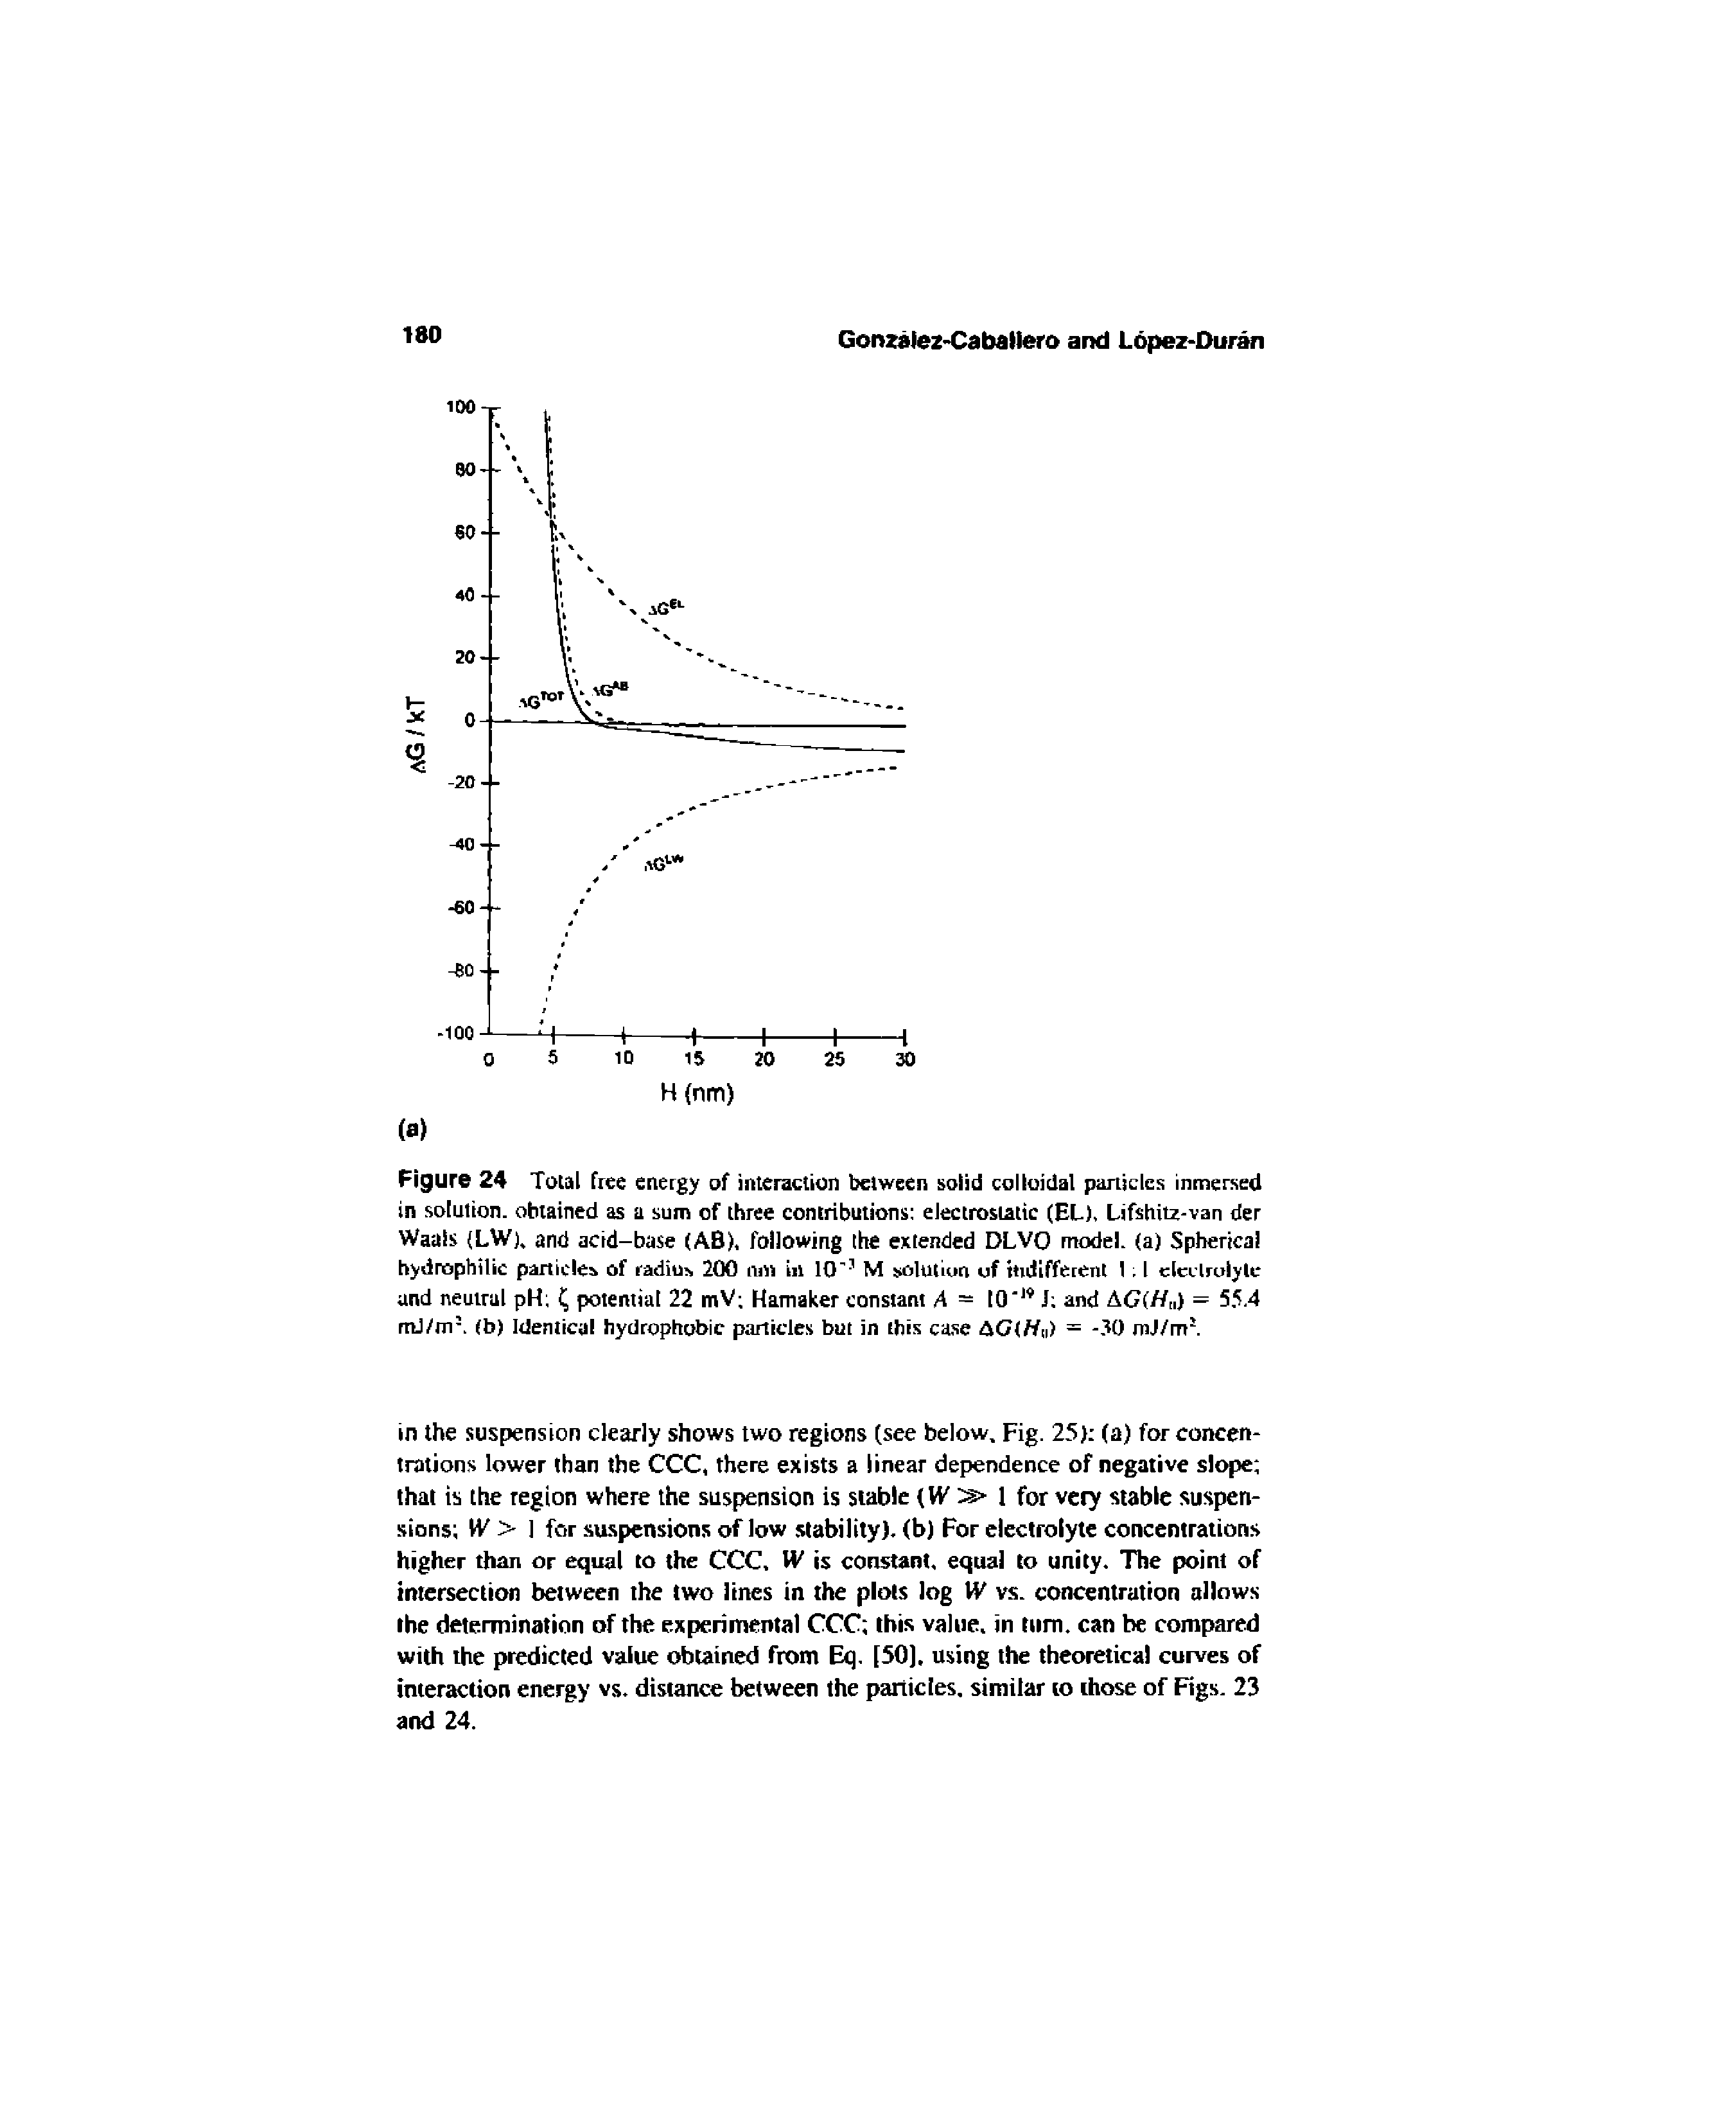 Figure 24 Total free energy of interaction between solid colloidal panicles inmersed in solution, obtained as a sum of three contributions electrostatic (EL), Lifshitz-van der Waals (LW). and acid-base (AB), following the extended DLVO model, (a) Spherical hydrophilic panicles of radius 2(X) run in 10 M solution of ttidlfferent I. I clcclruiyle and neutral pH potential 22 mV Hamaker constant A 10" J and AC(H ) = 5,. 4 mJ/m (b) Identical hydrophobic particles but in this case AG(ffu) = -.10 mJ/m ...